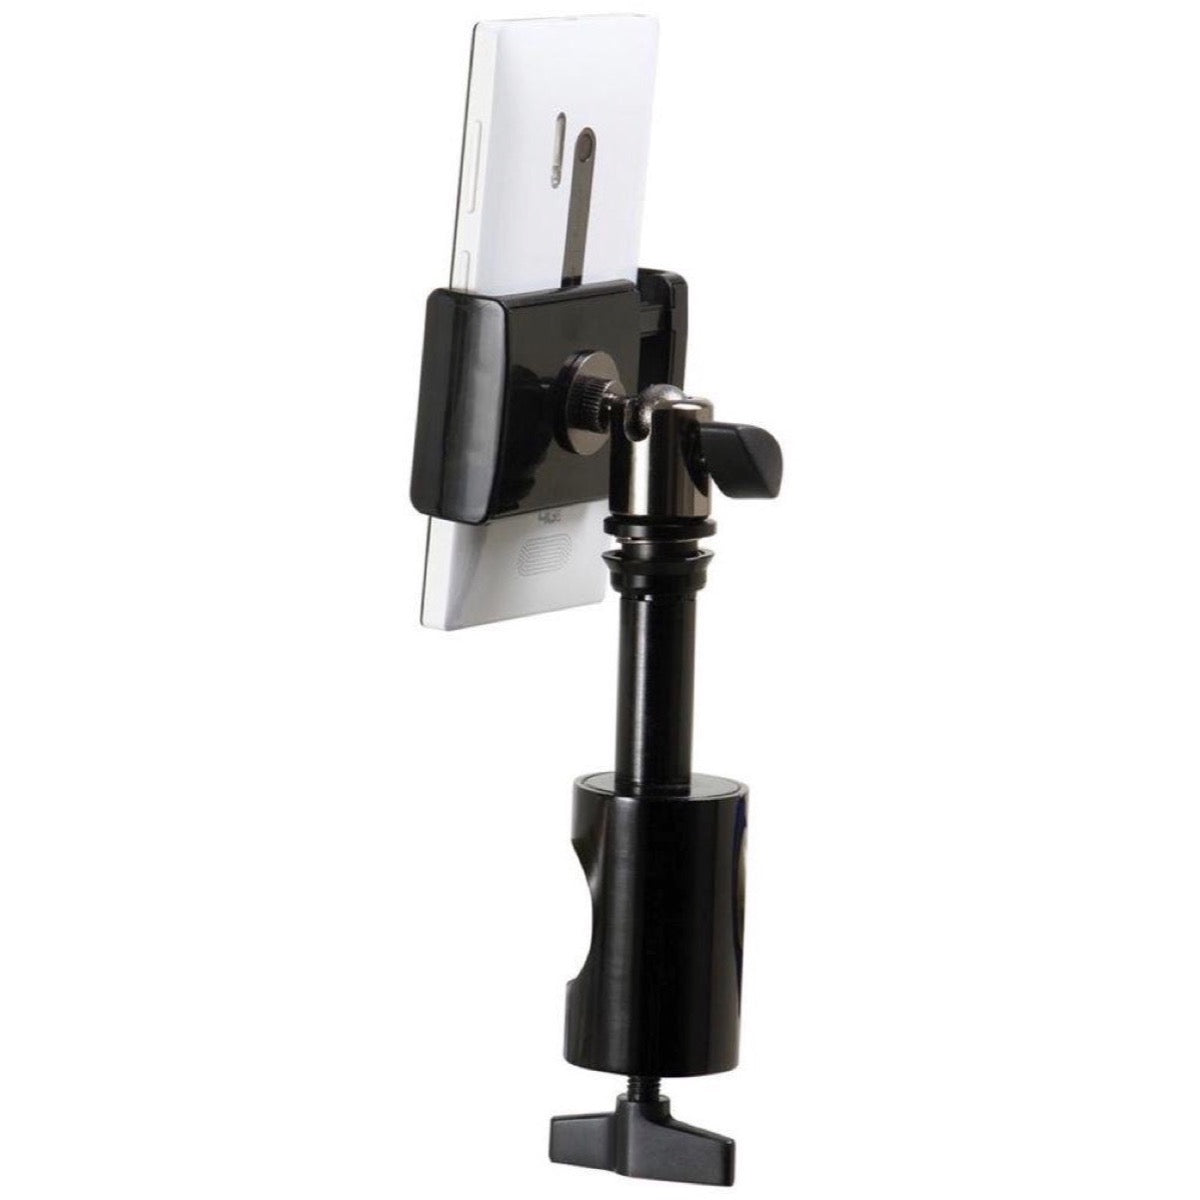 On-Stage TCM1901 Grip-On Universal Device Holder with Round Clip